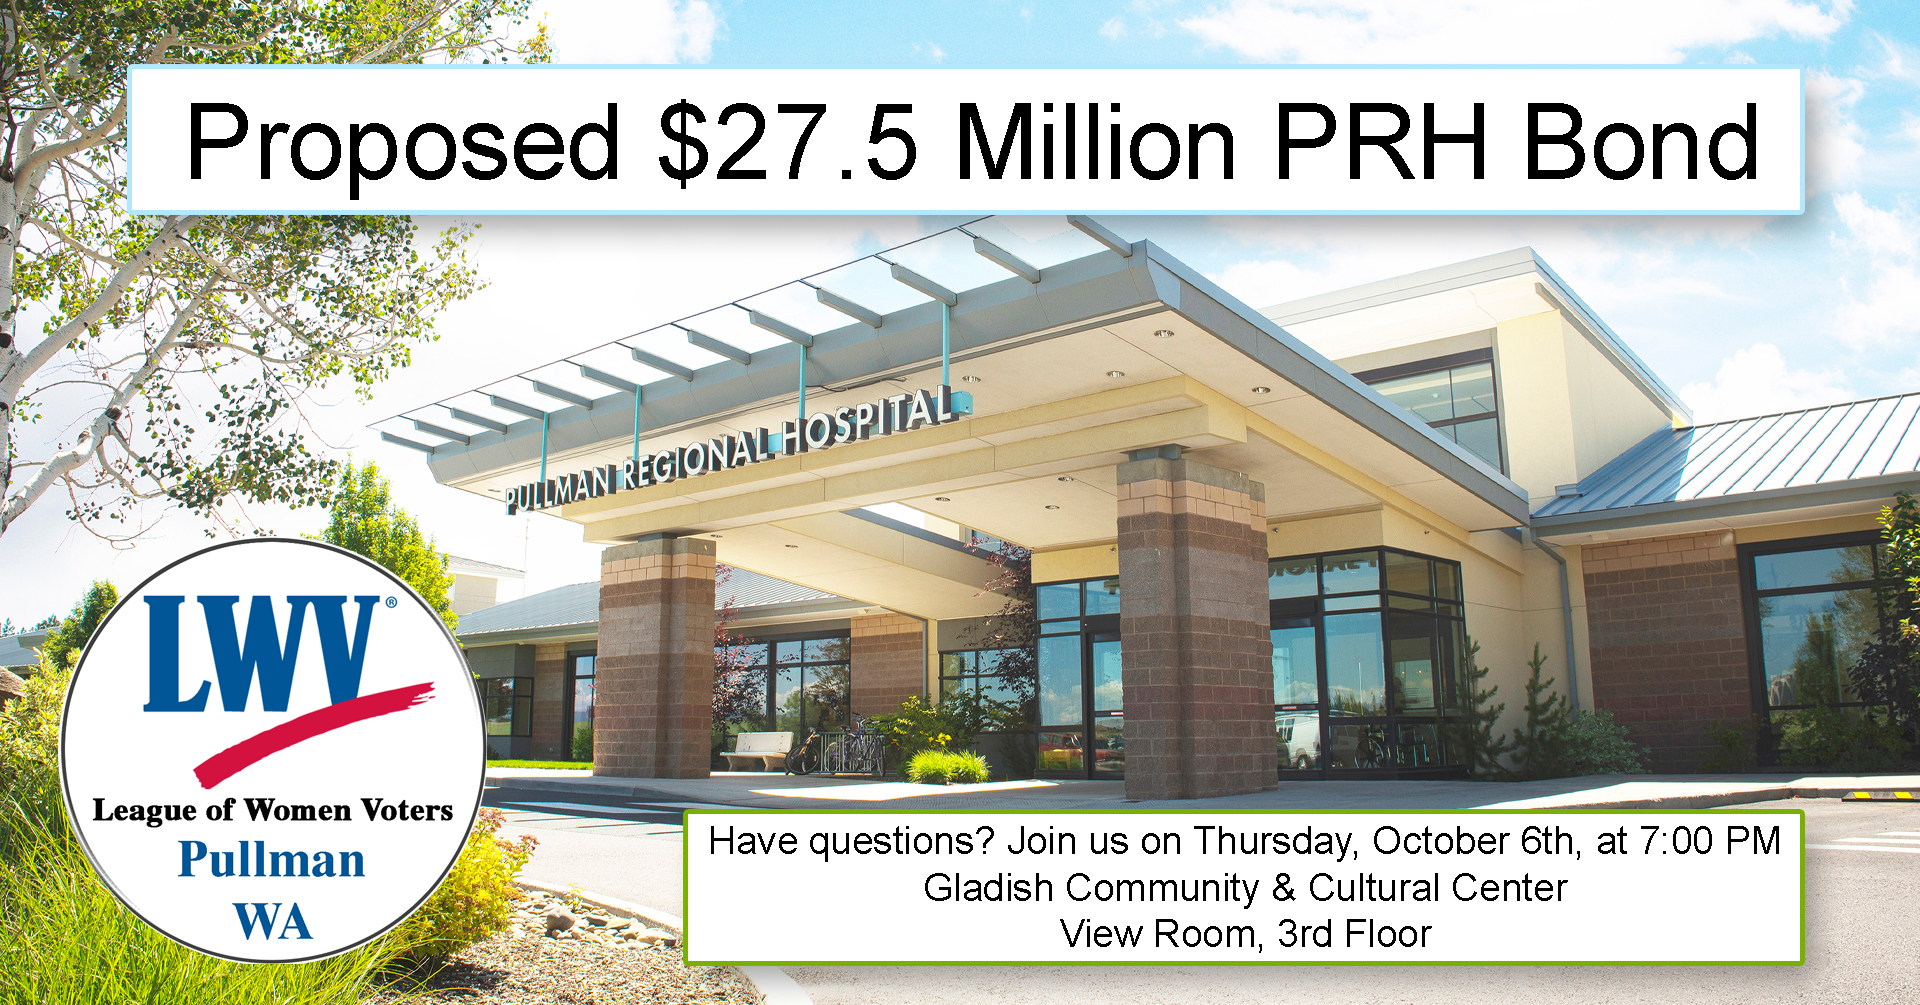 picture of Pullman hospital with title of Proposed $27.5 Million PRH Bond and league logo